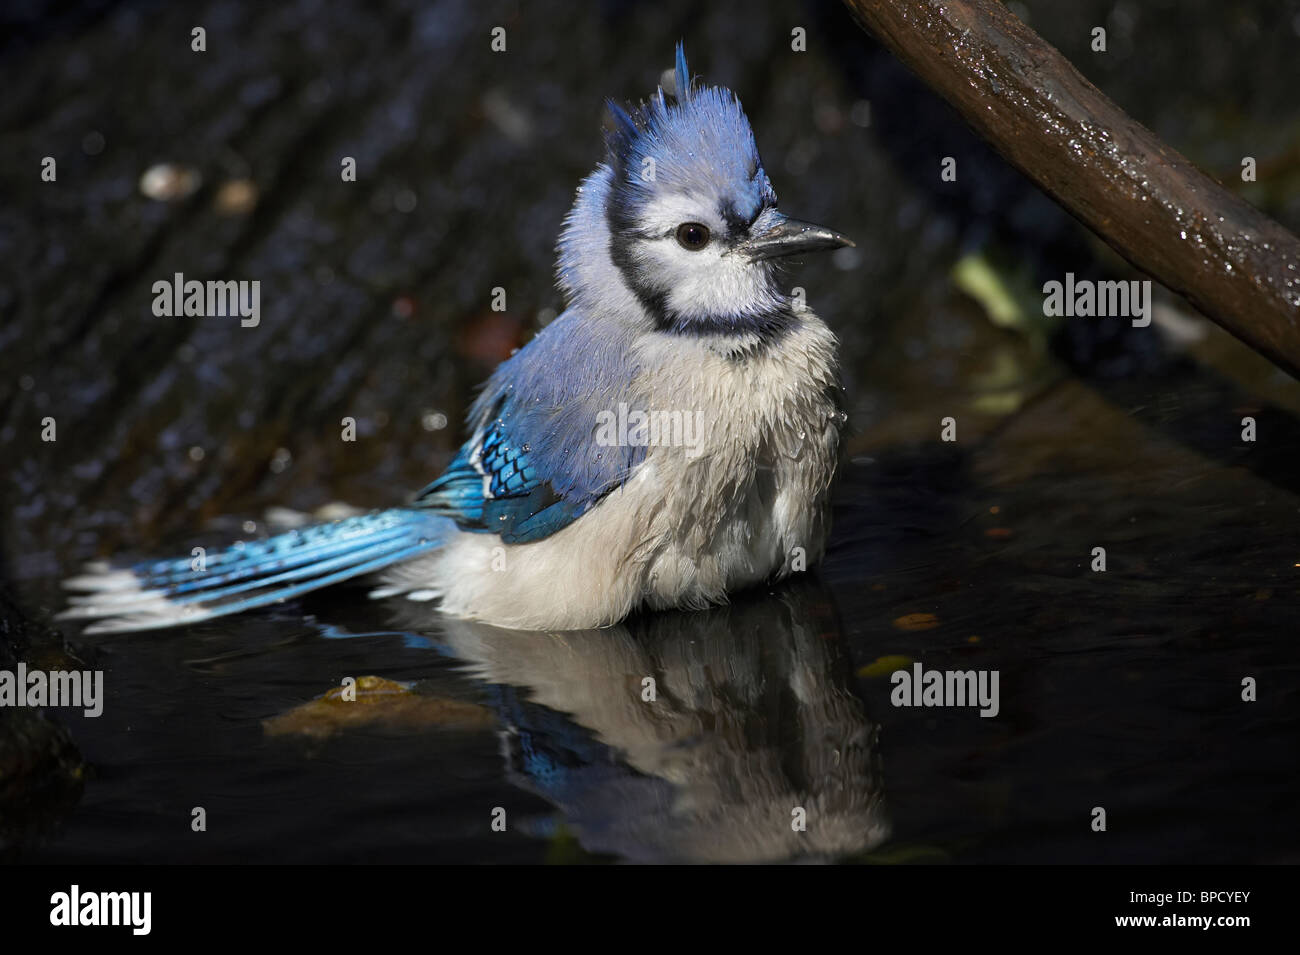 Adult Male Blue Jay Taking a Bath Stock Photo